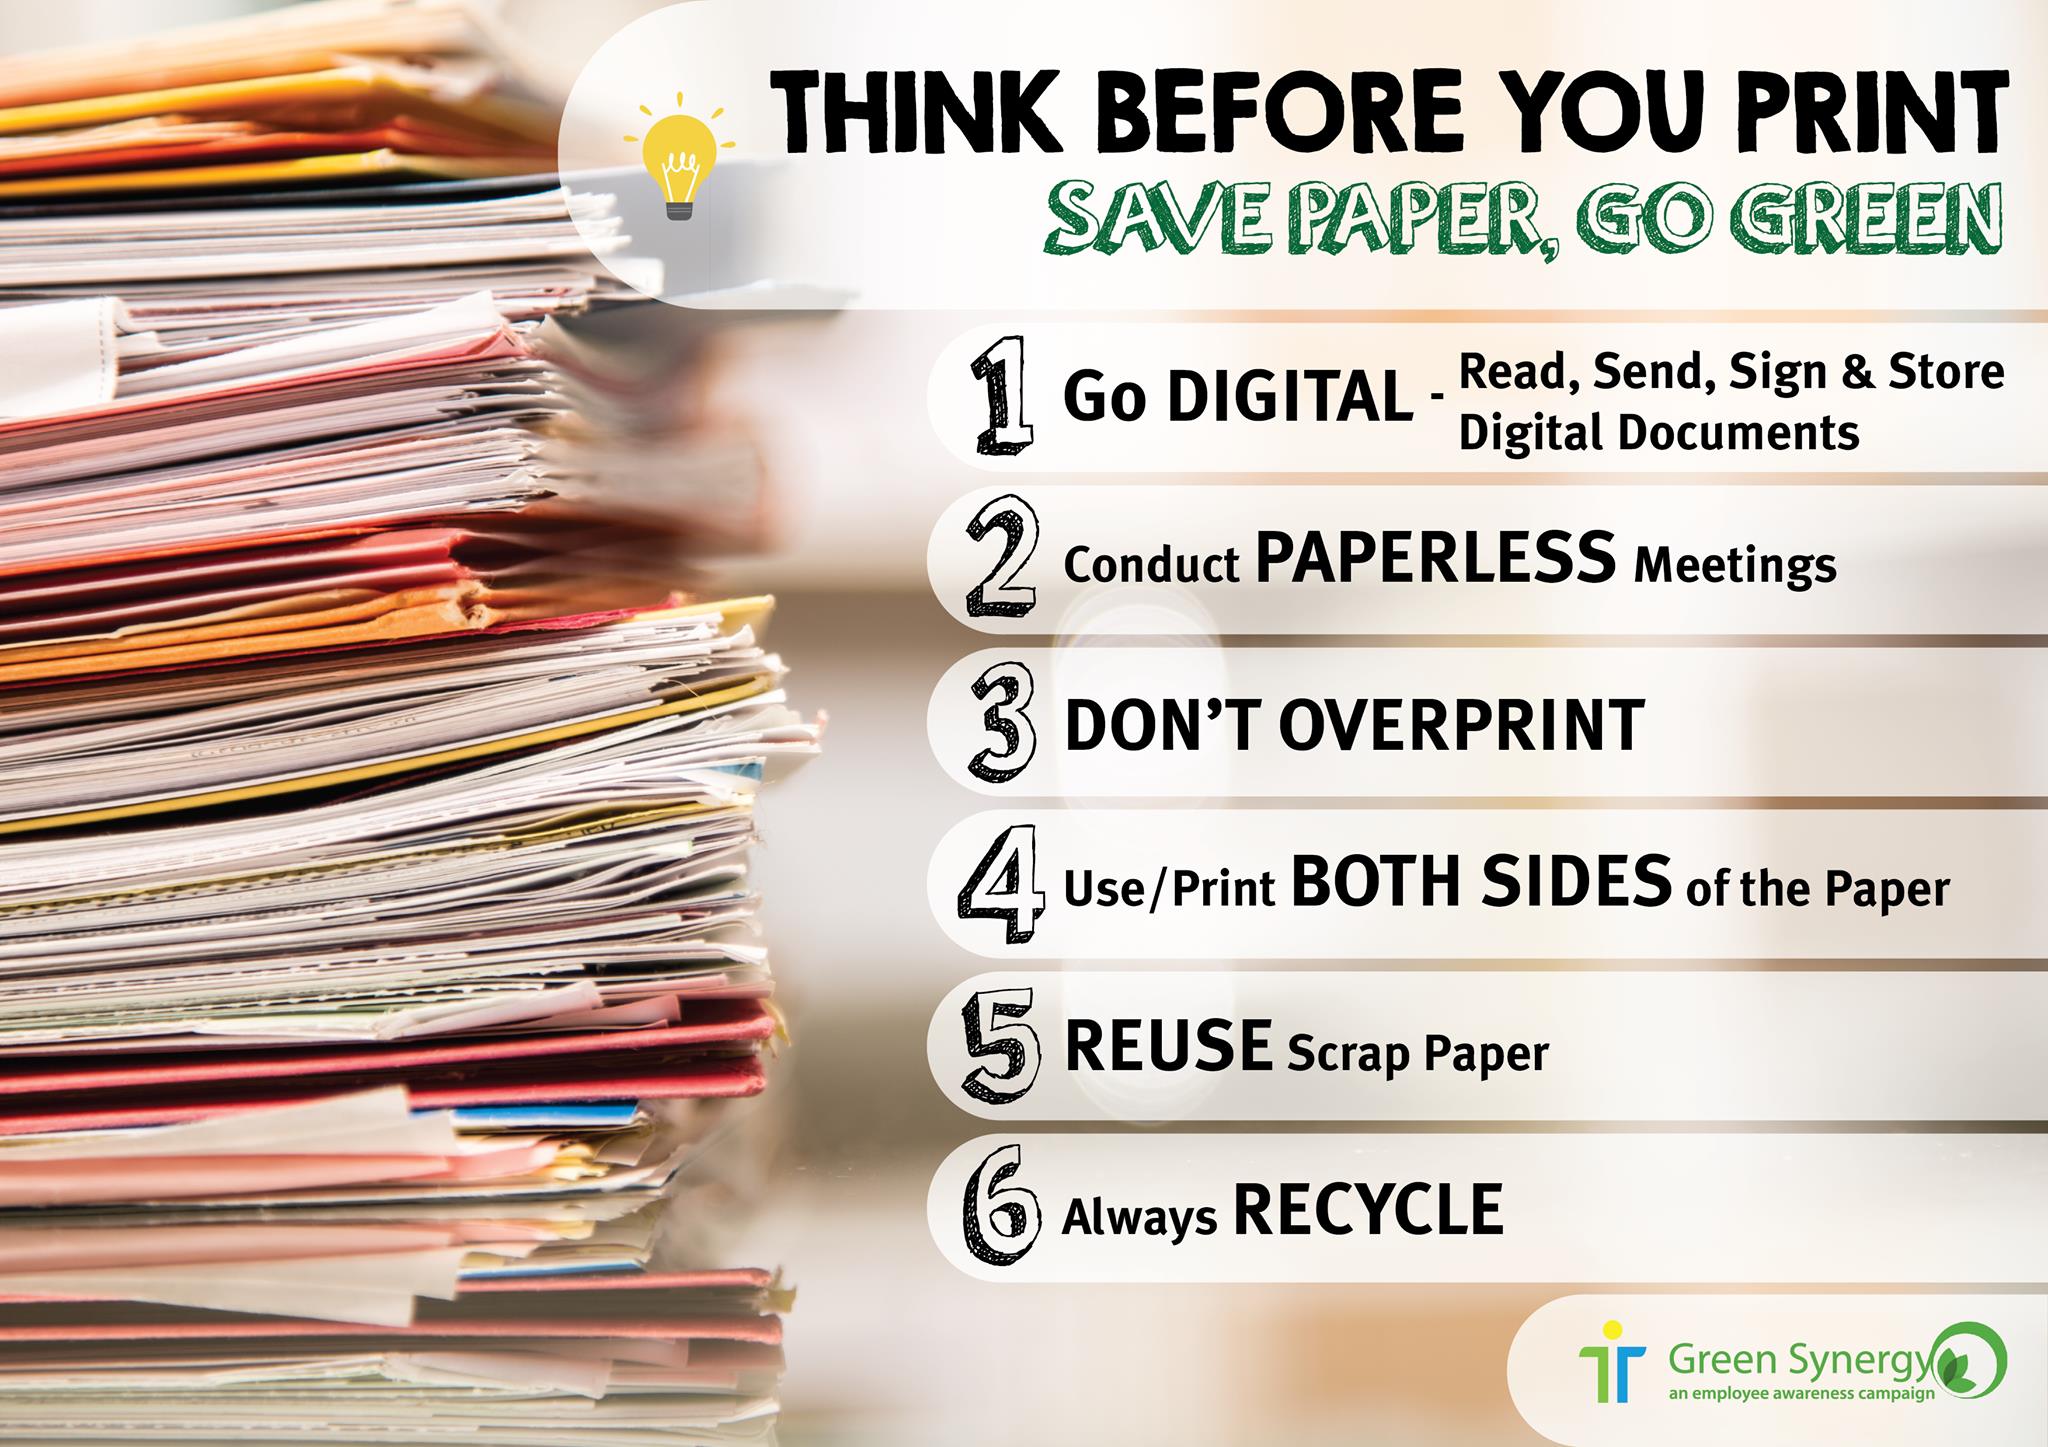 How to Save Paper in the Office